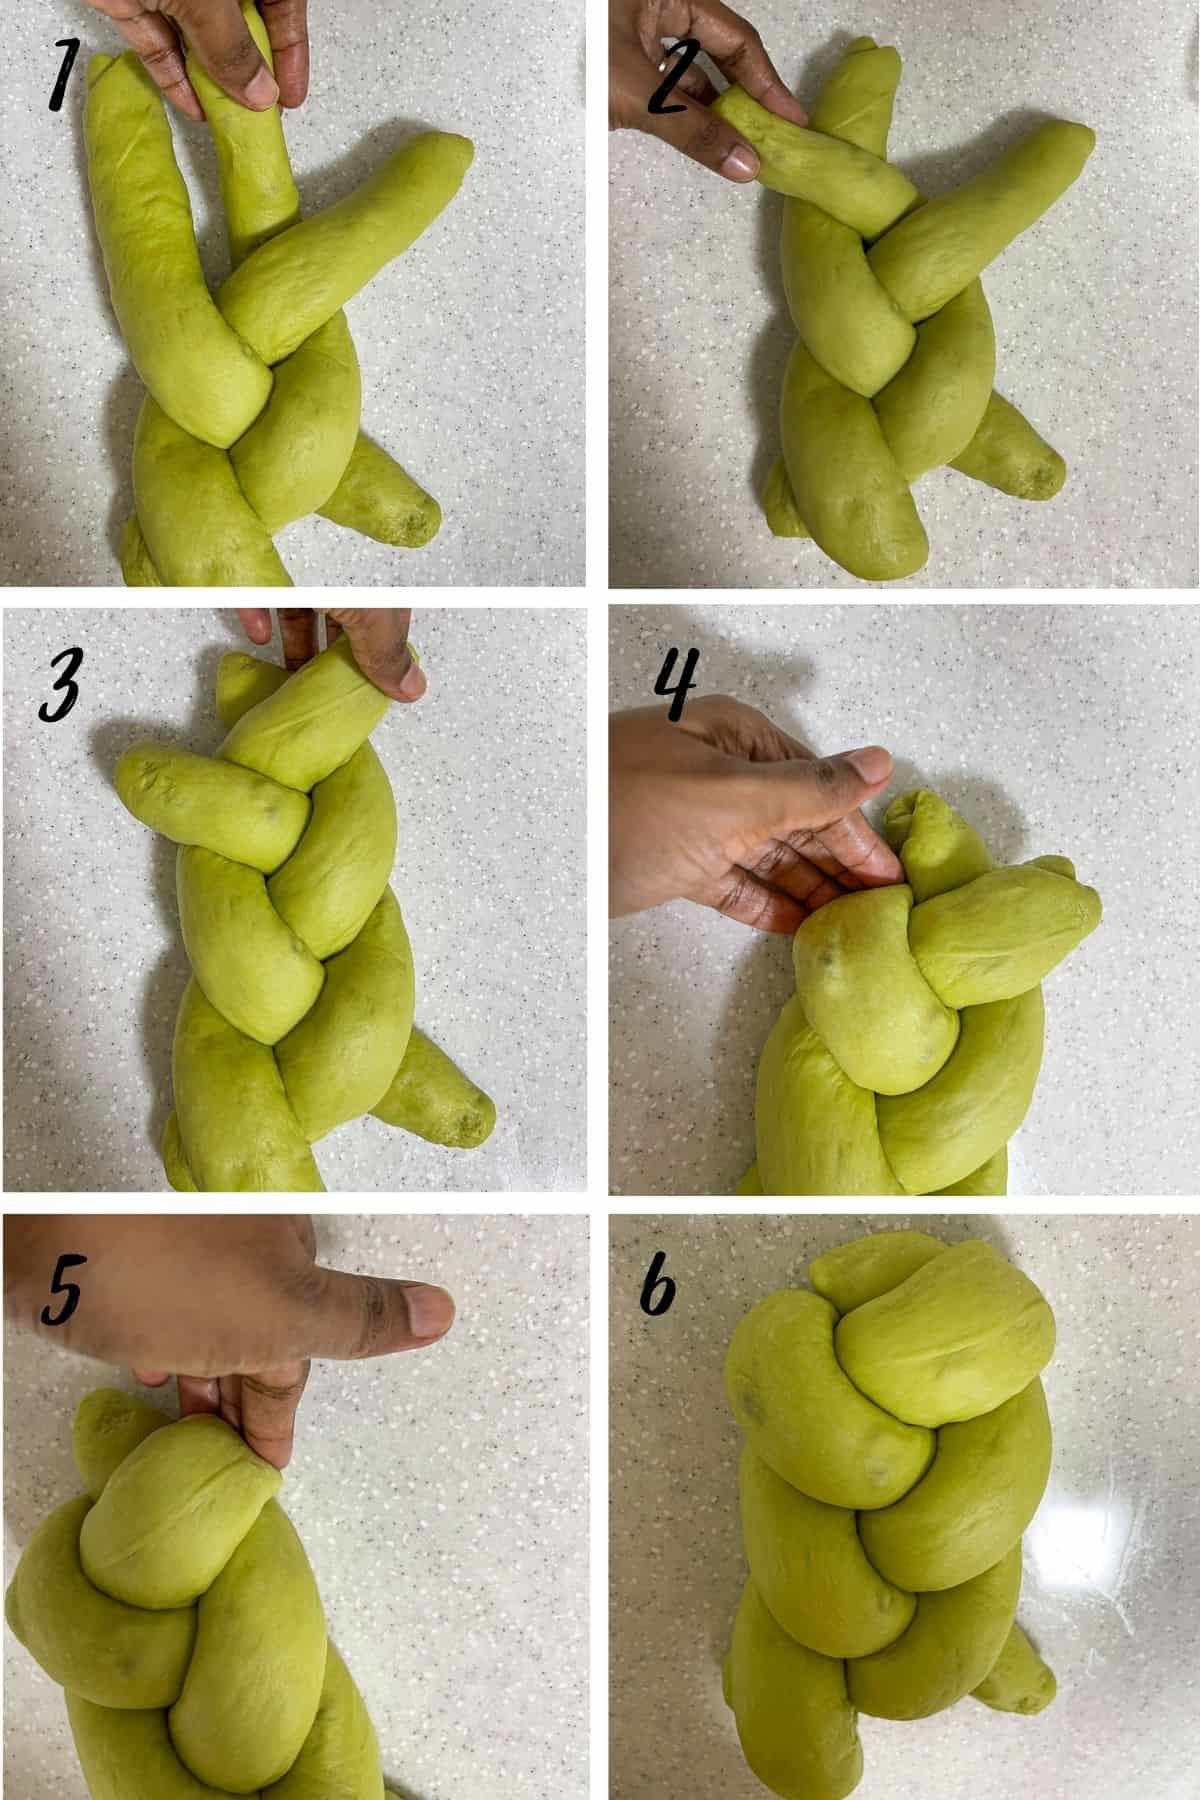 A poster of 6 images showing how to make a braid loaf.